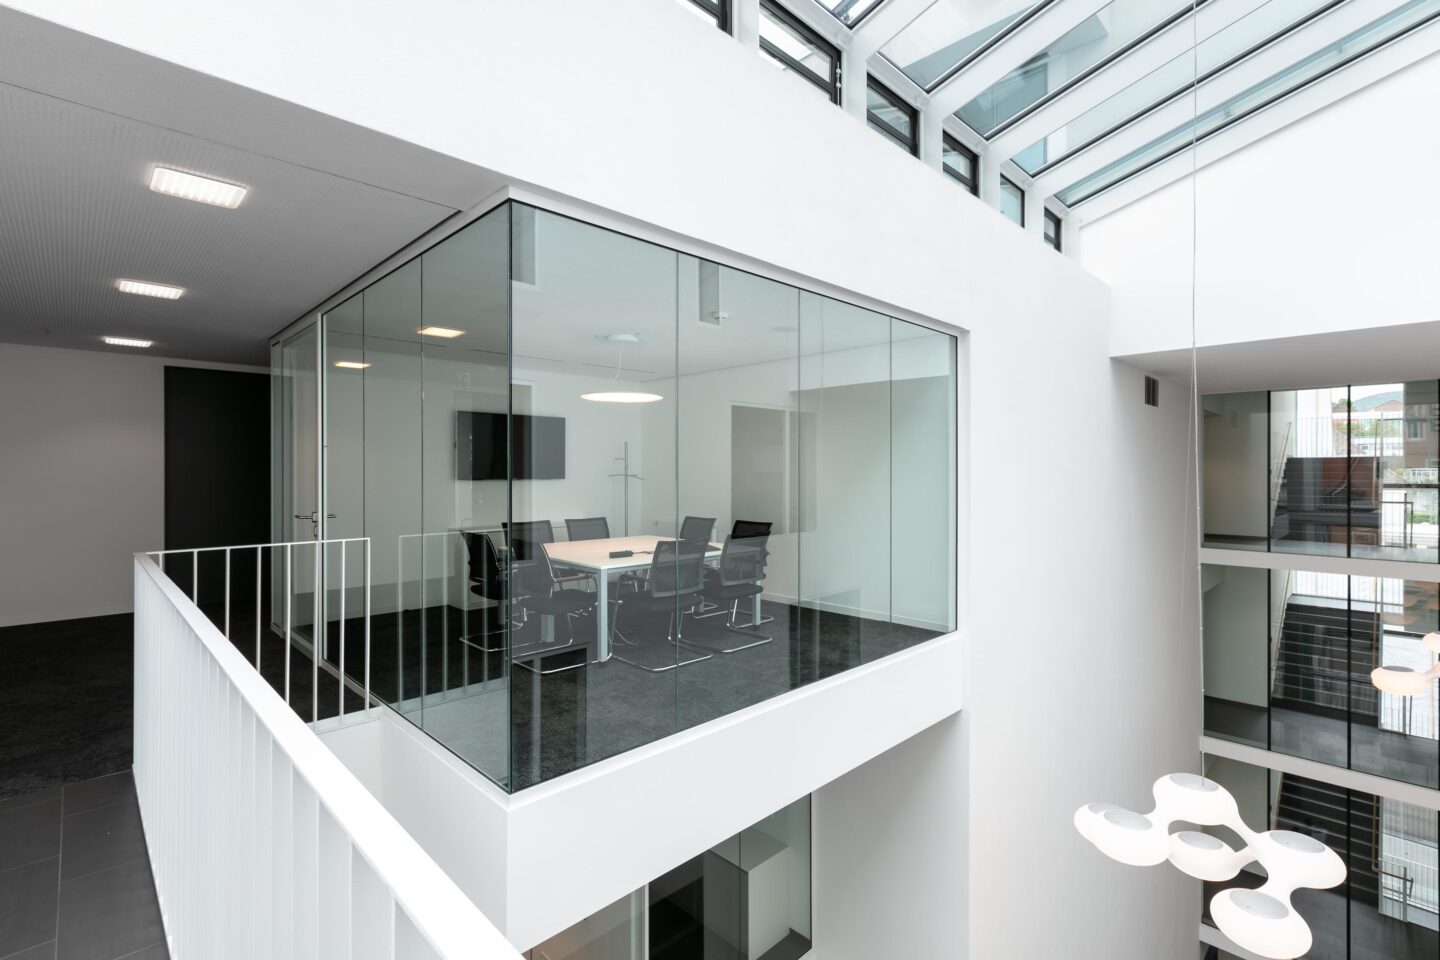 partition walls made of glass as a functional design element │ fall-protection components │ dimensioning and design rules